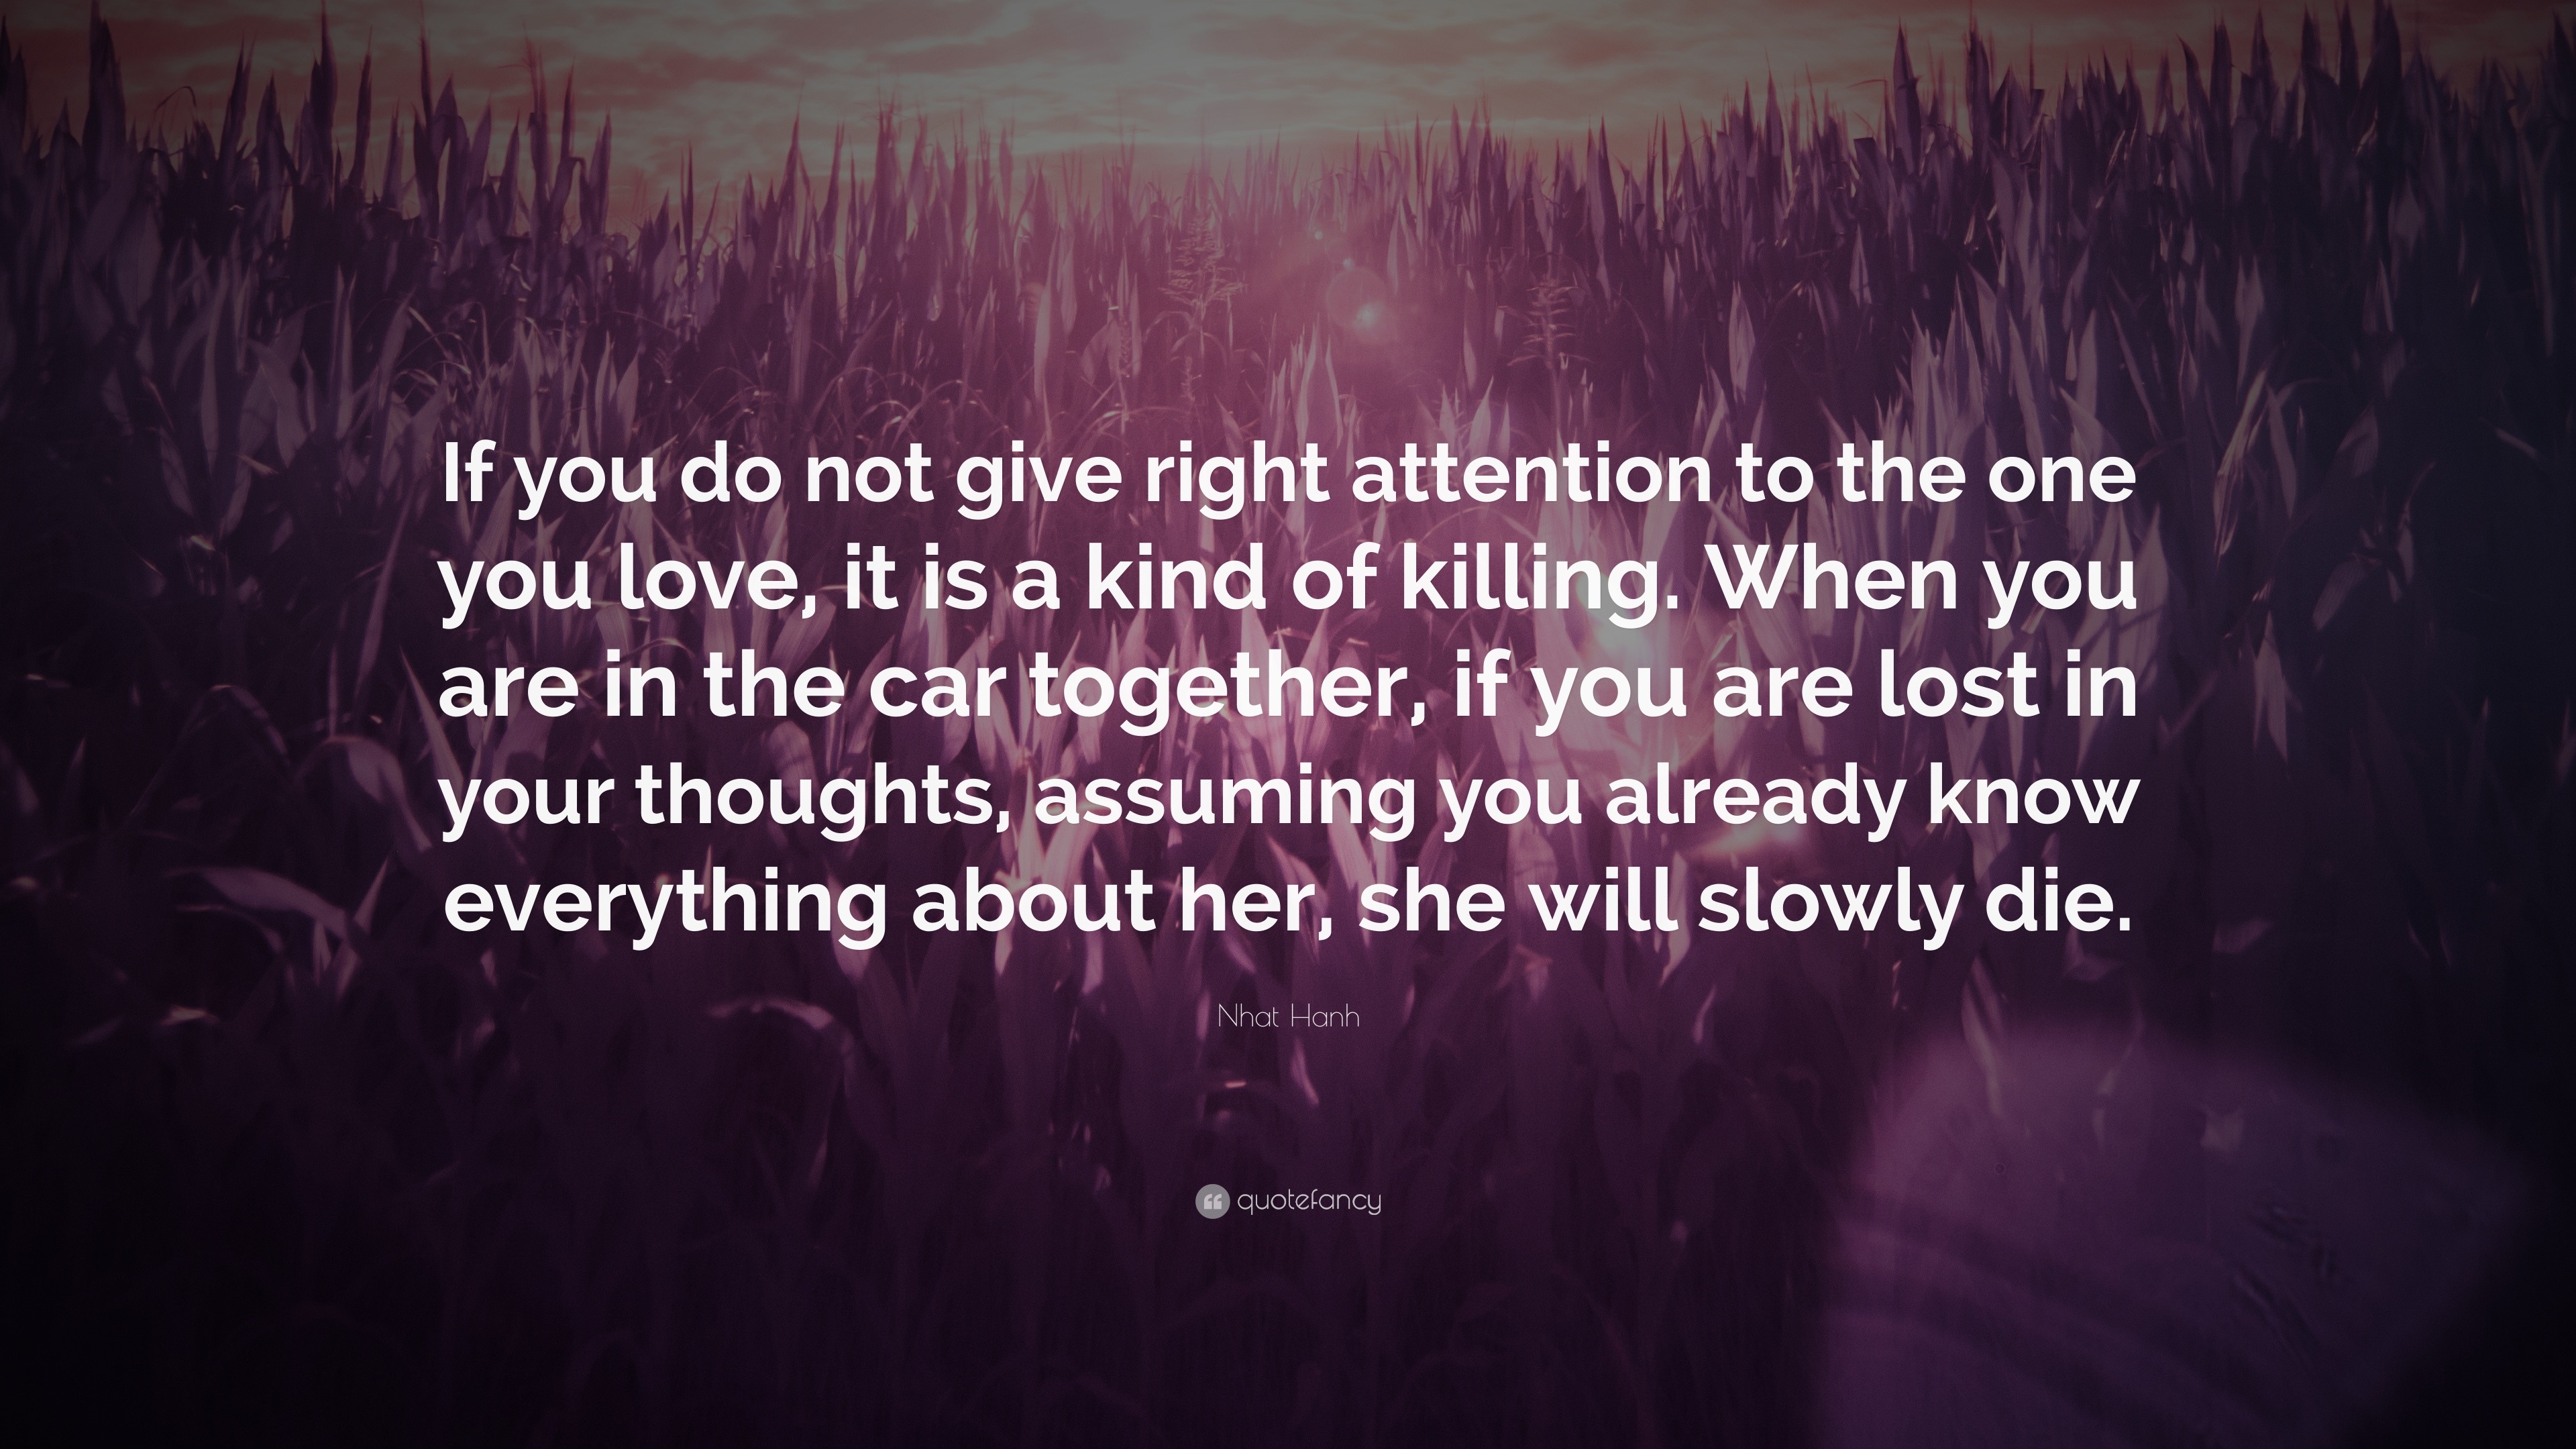 Nhat Hanh Quote “If you do not give right attention to the one you